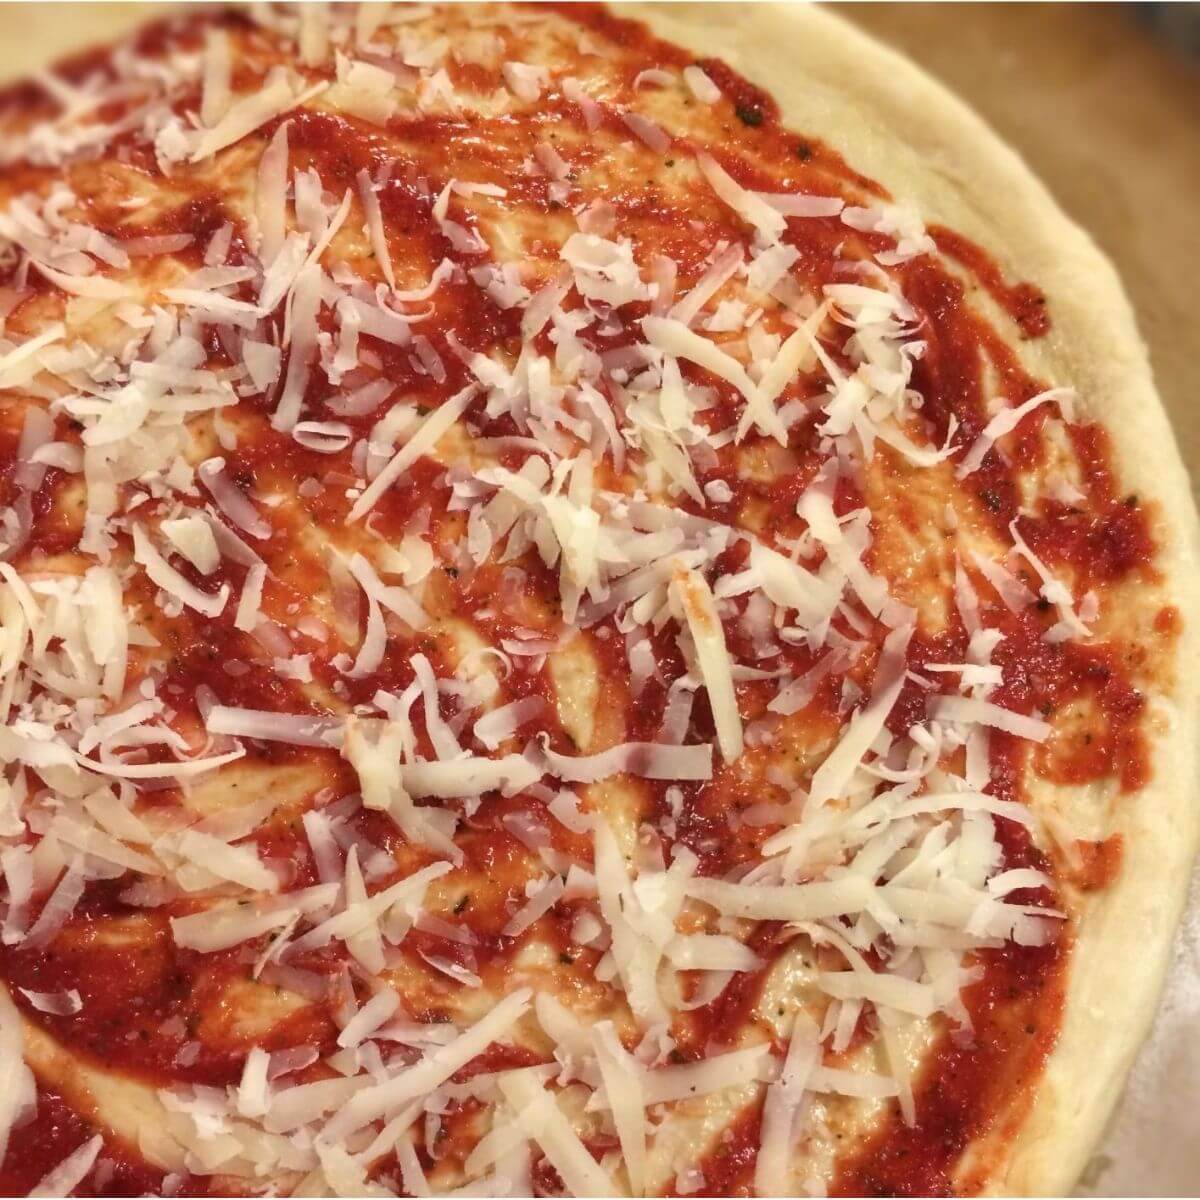 pizza dough, sauce, and shredded cheese on a pizza stone.